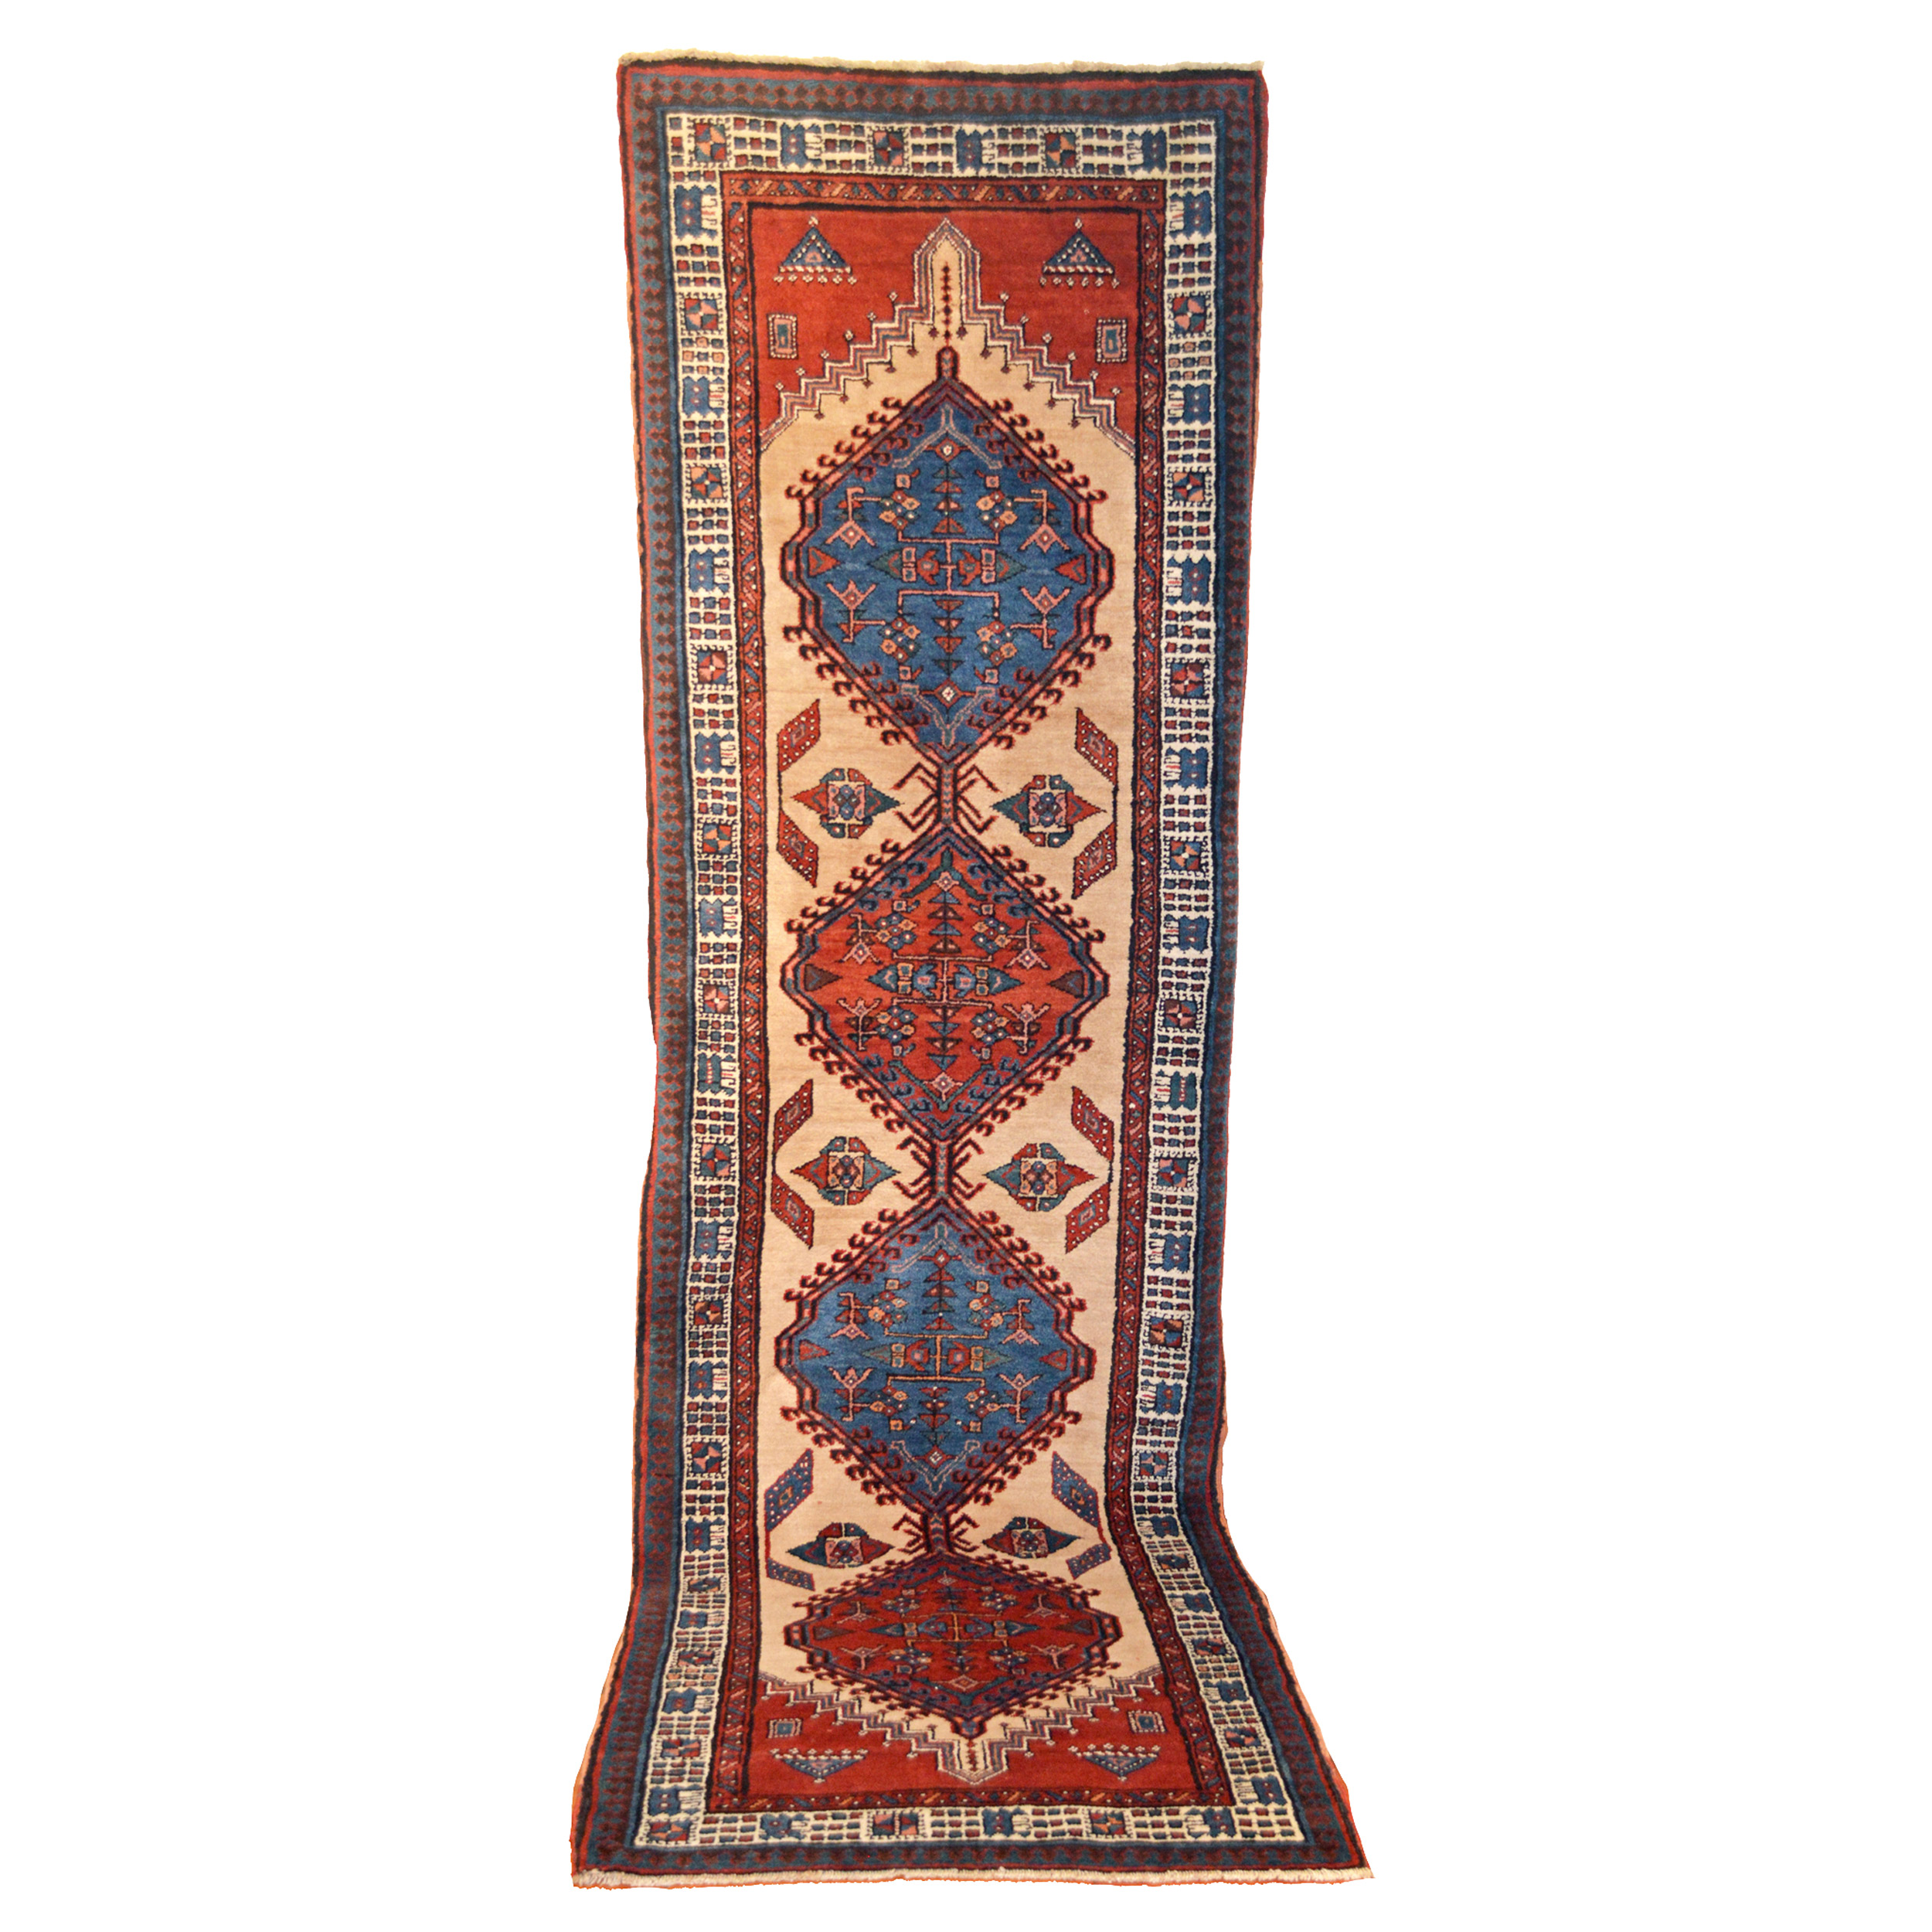 A vintage Persian Serab runner, circa 1930, with two mid blue and two soft red medallions on a light camel color field. Douglas Stock Gallery, antique Persian runner rugs, antique Oriental rugs Boston,MA area